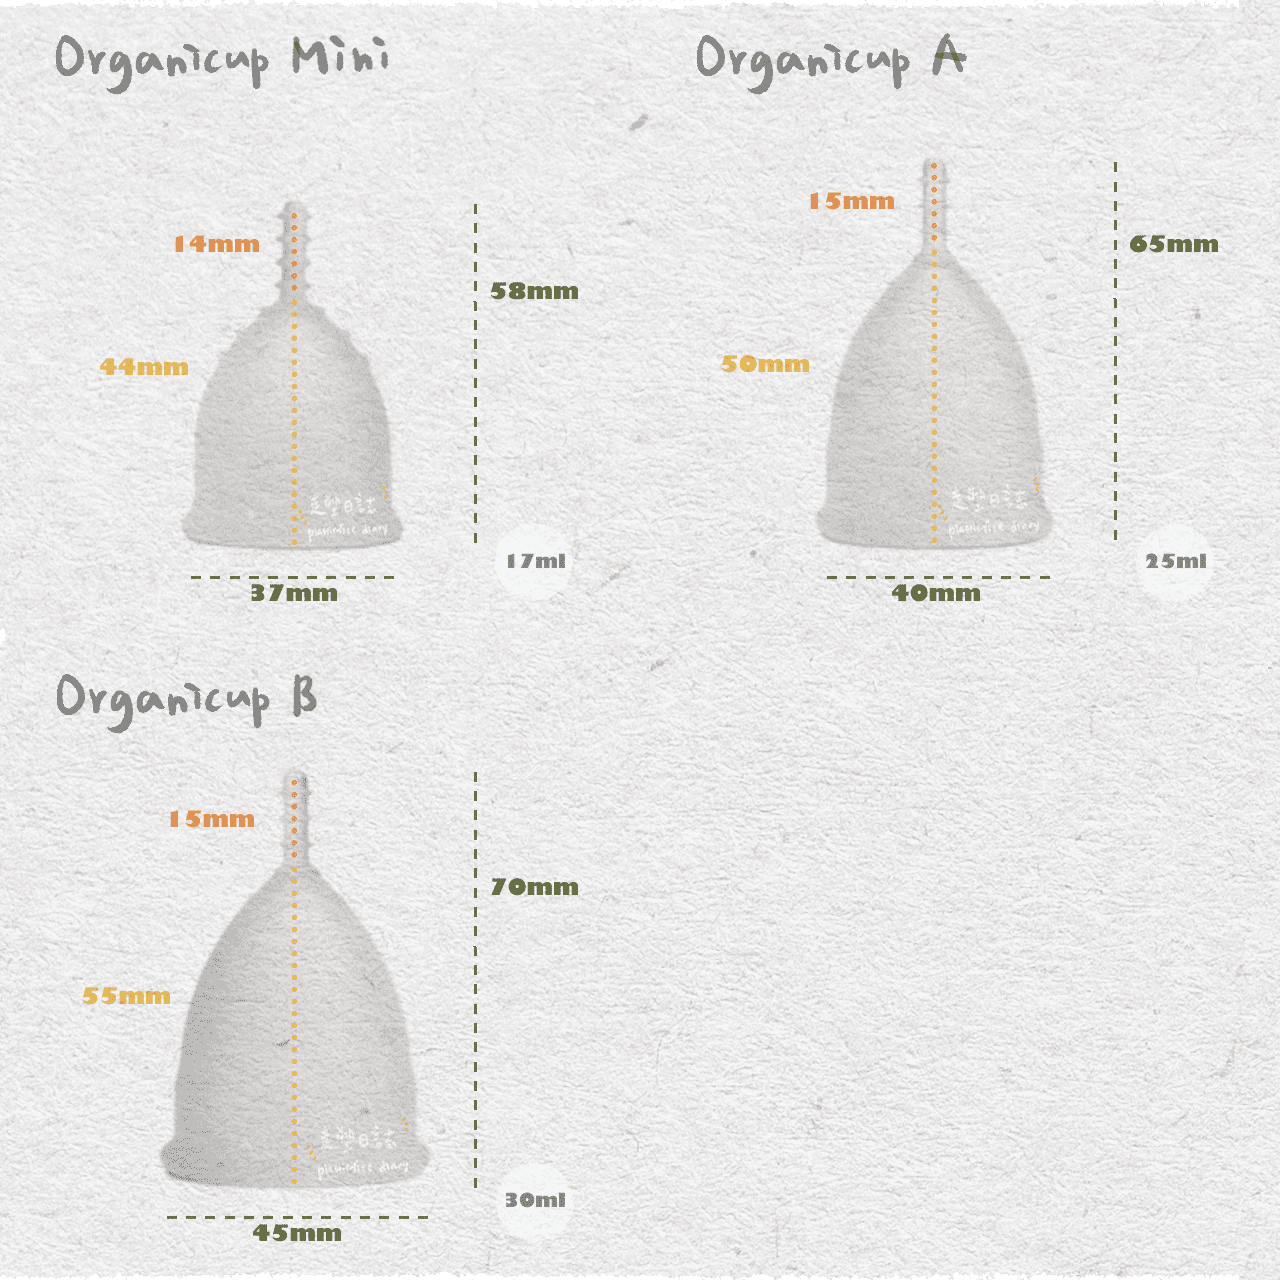 Organicup Size.png